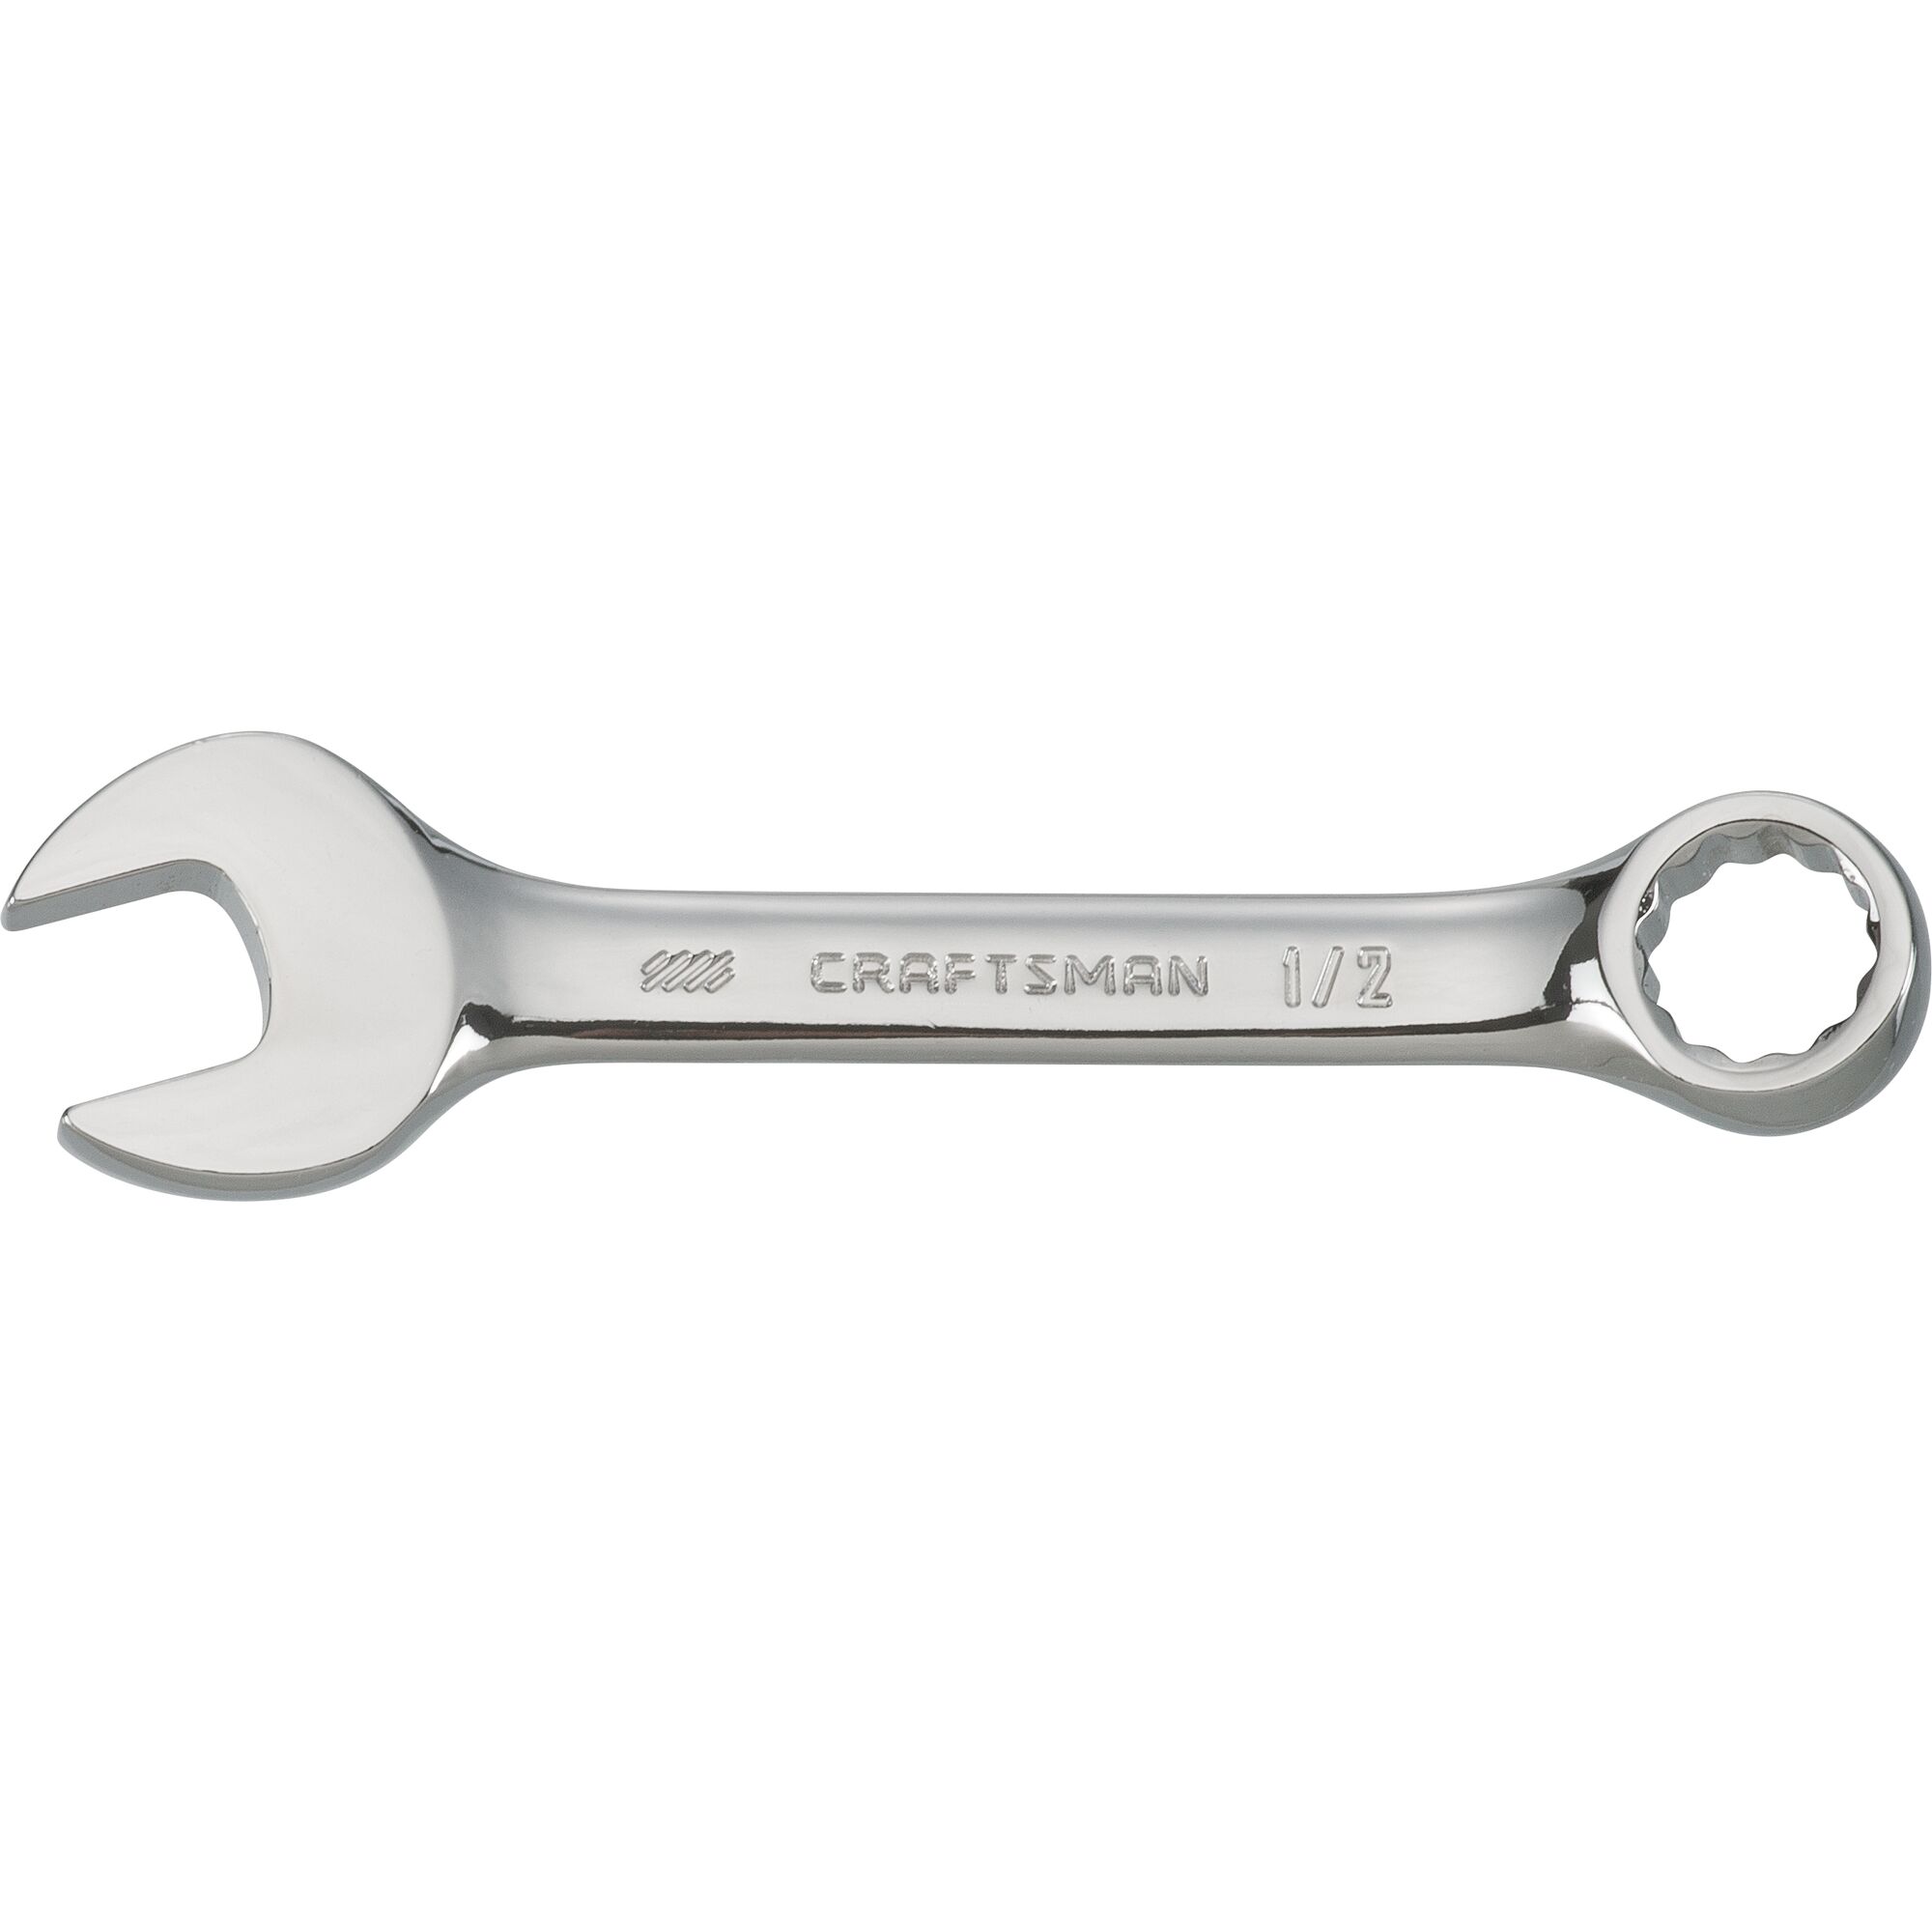 1 half inch short S A E combination wrench.